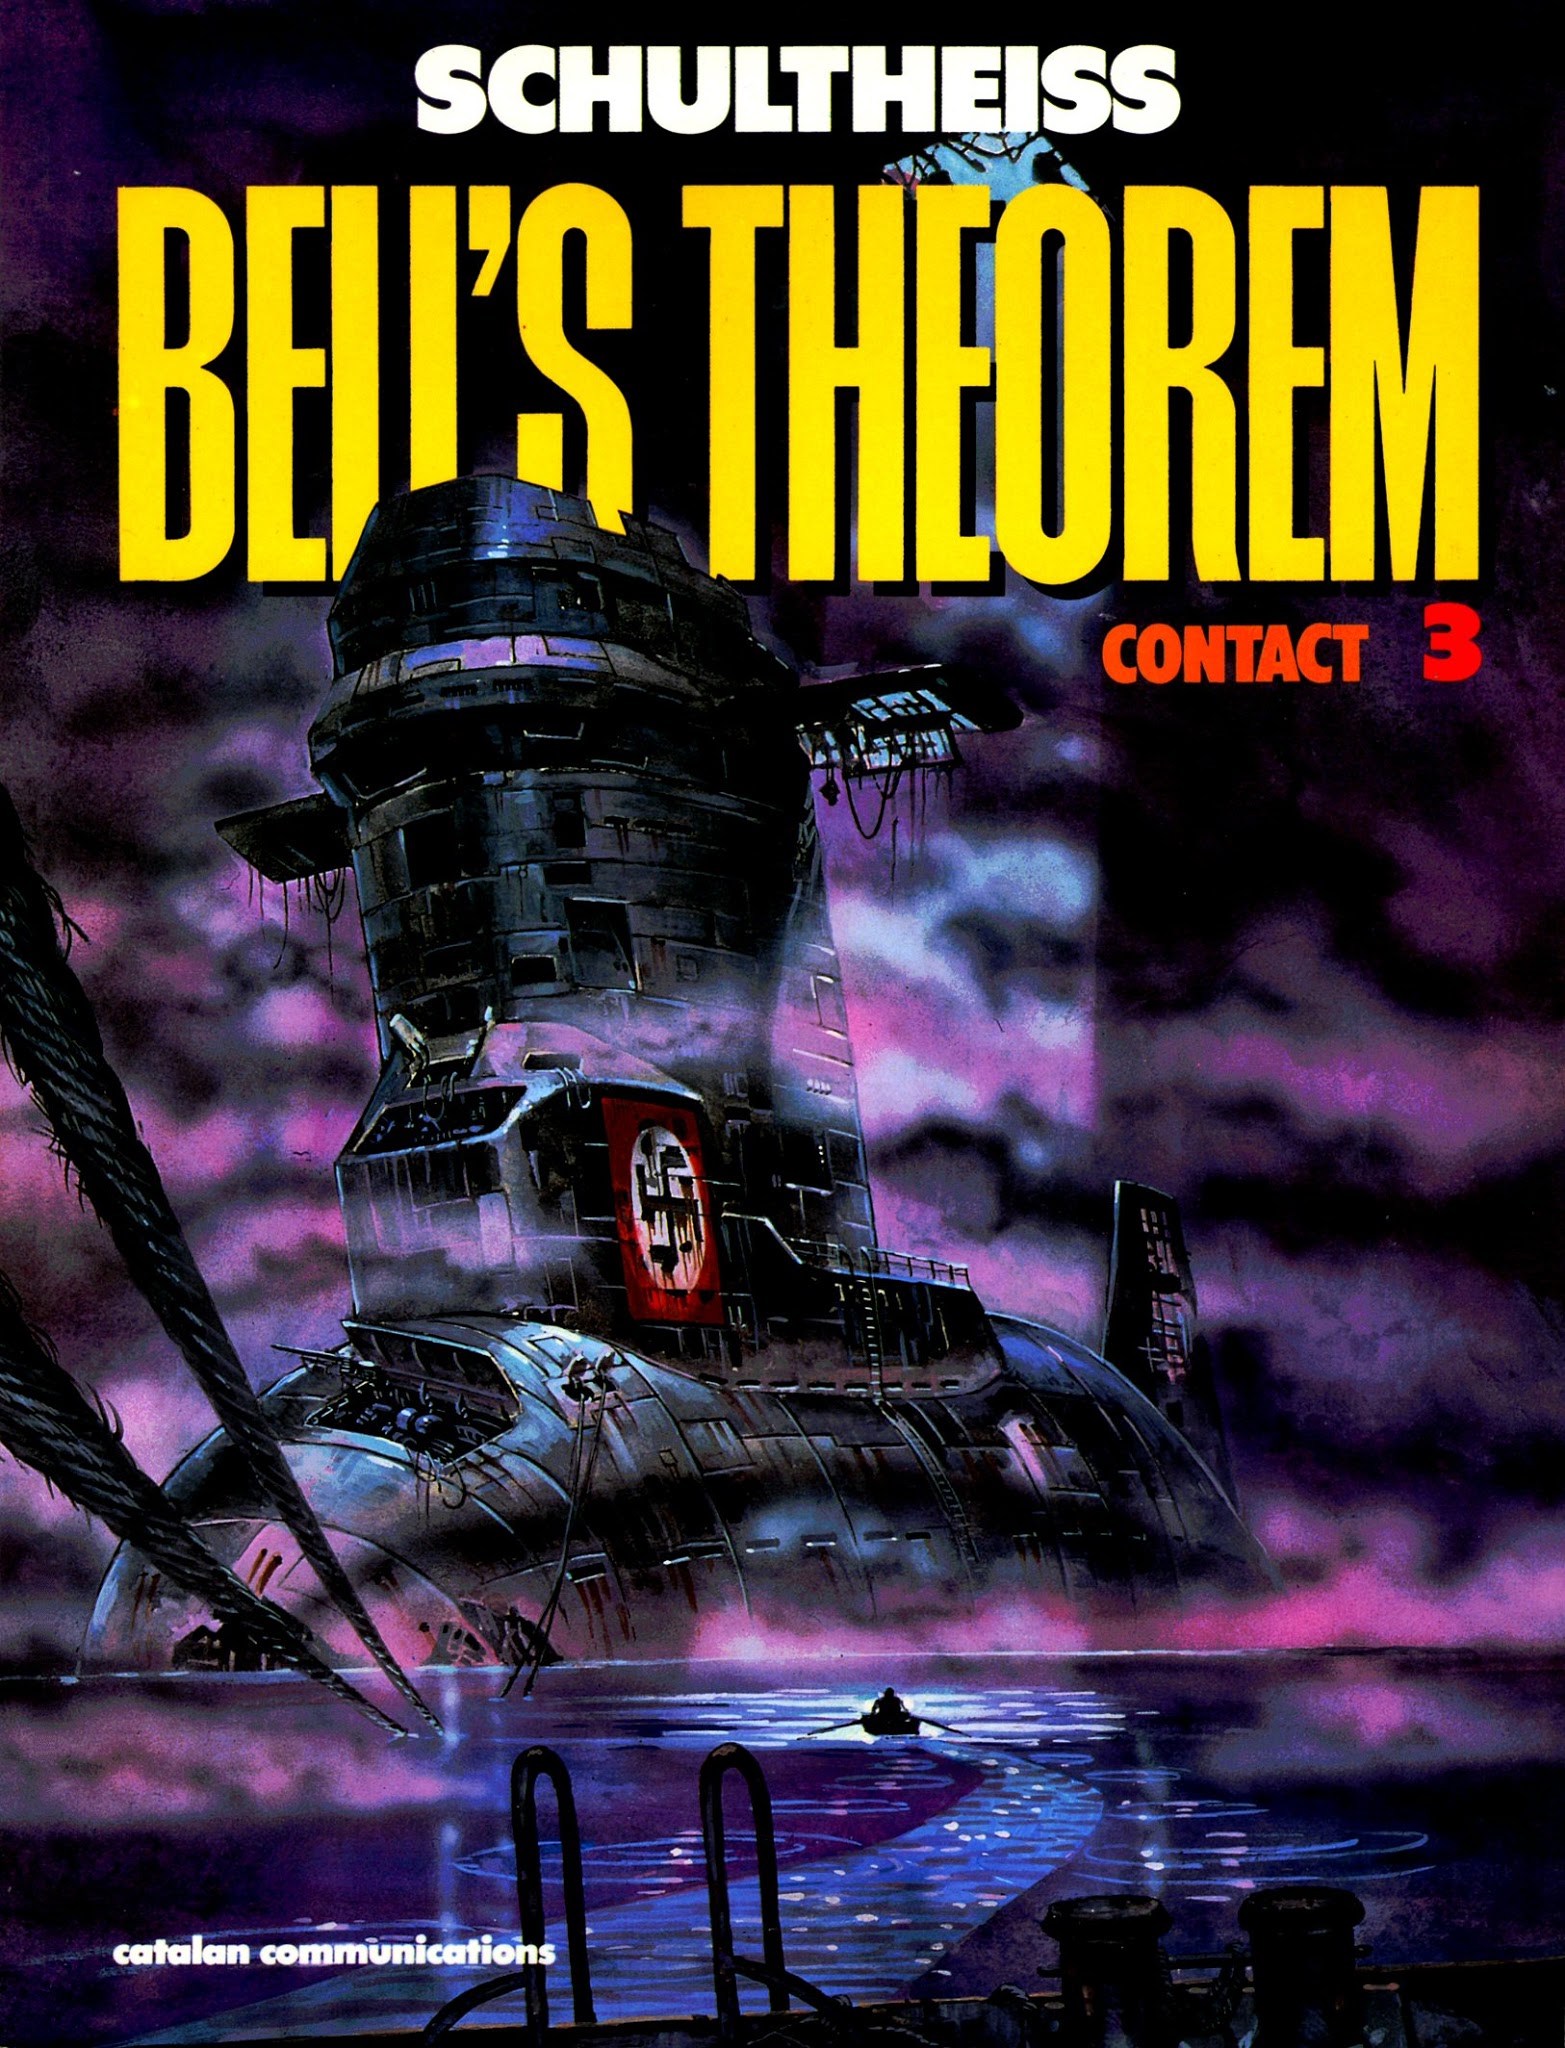 Read online Bell's Theorem comic -  Issue #3 - 1